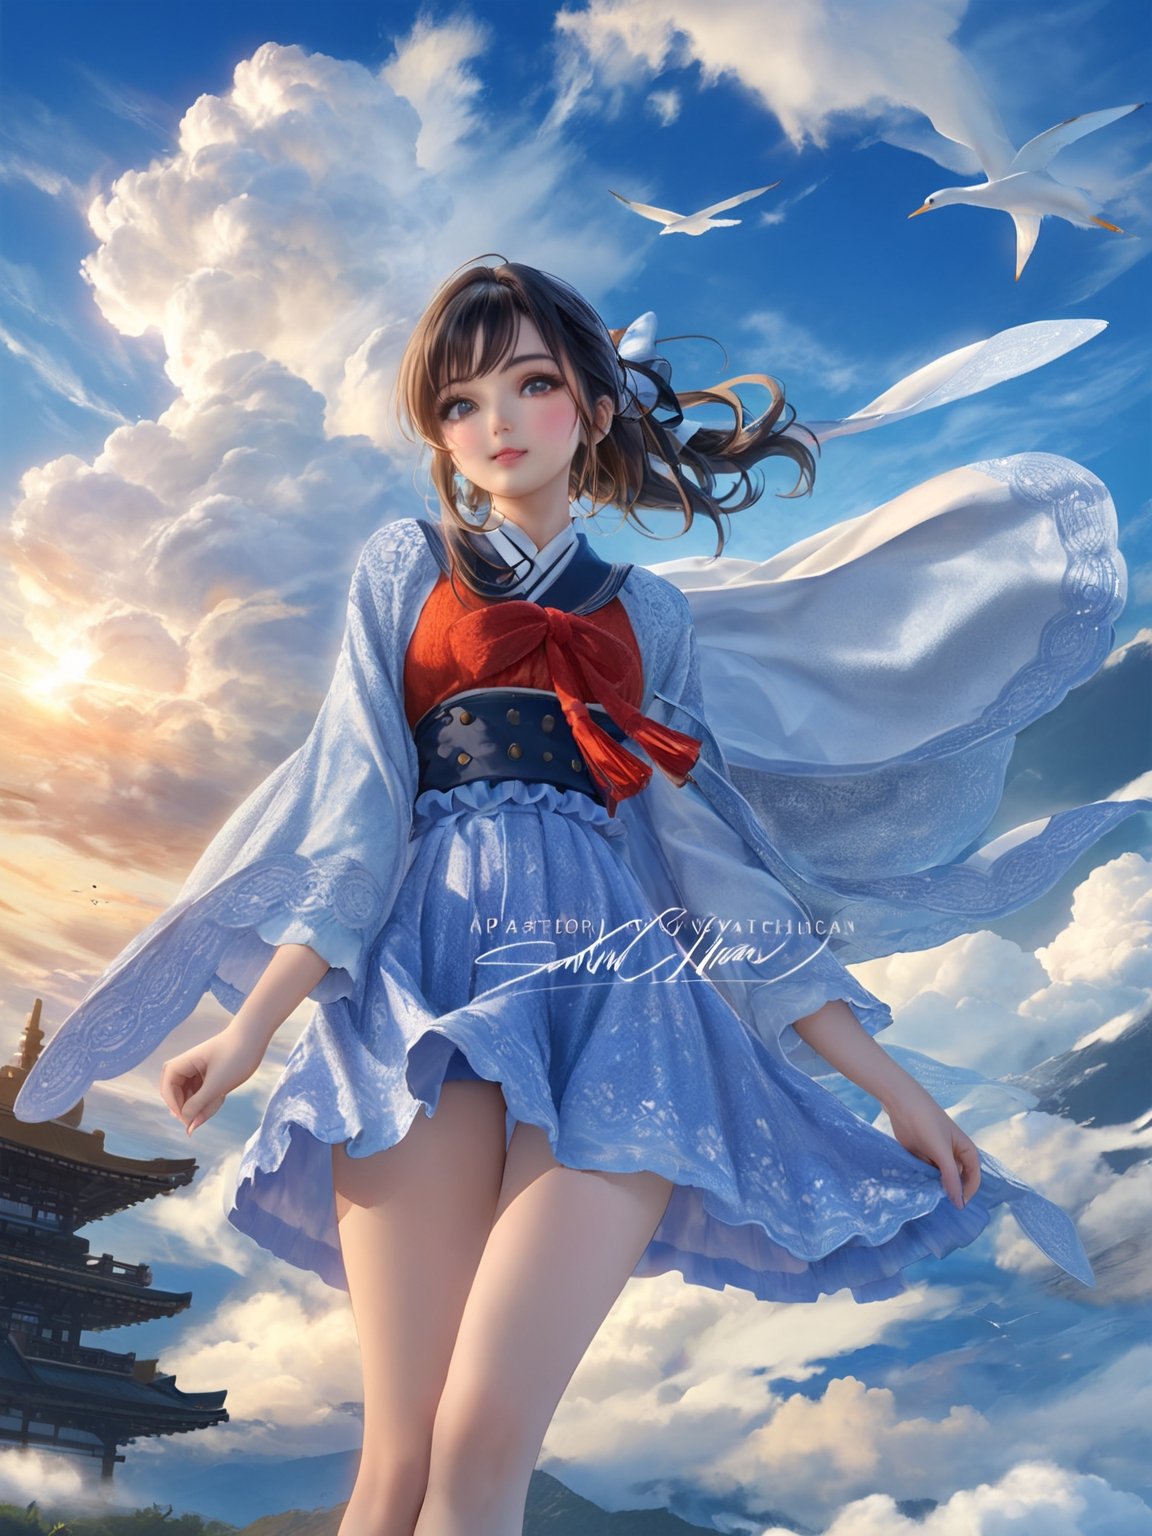 //Quality,
masterpiece, best quality, ultra detailed, 8K-UHD
,//Character,
1girl, solo
,//Fashion,
,//Background,
sky
,//Others,
,AsanagiStyle,sakimichan style